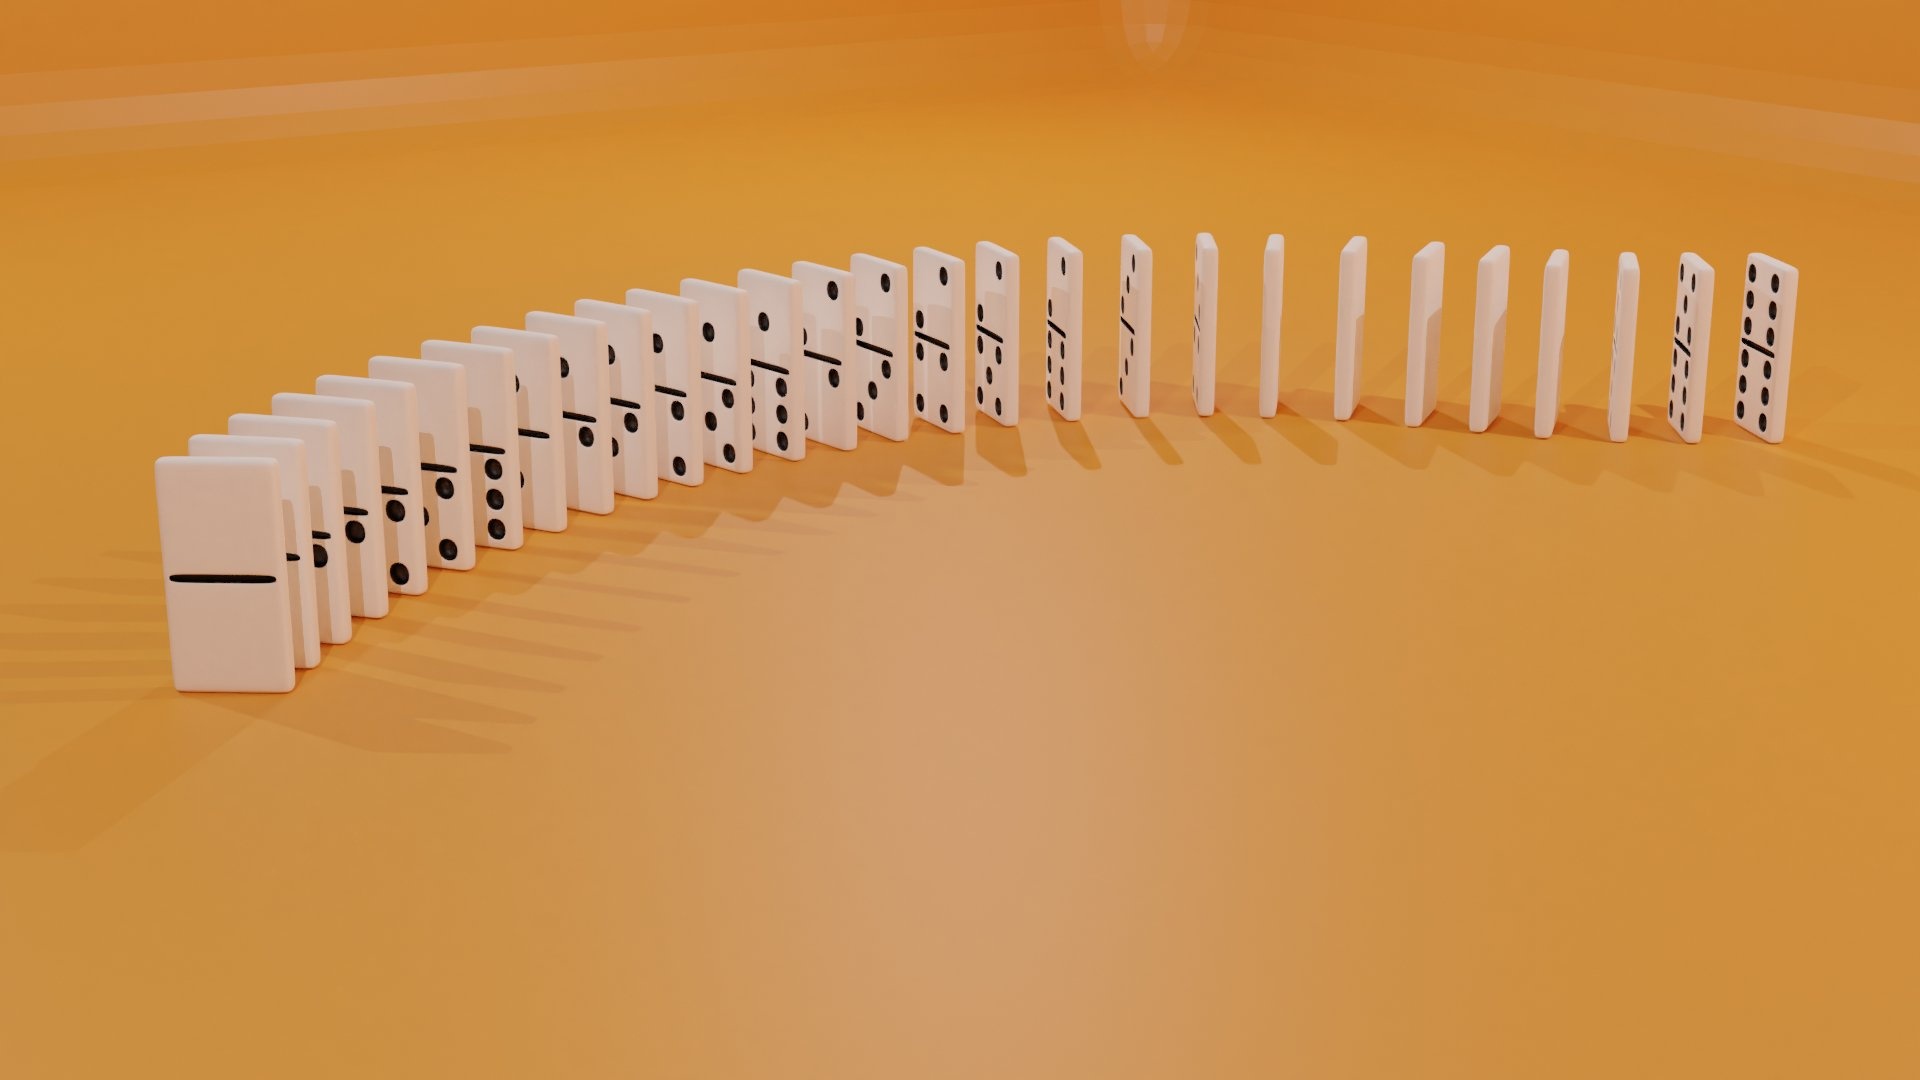 Dominoes: The column of gaming tiles stands on the yellow surface, Five Up, Mexican Train, Chicken Foot. 1920x1080 Full HD Wallpaper.